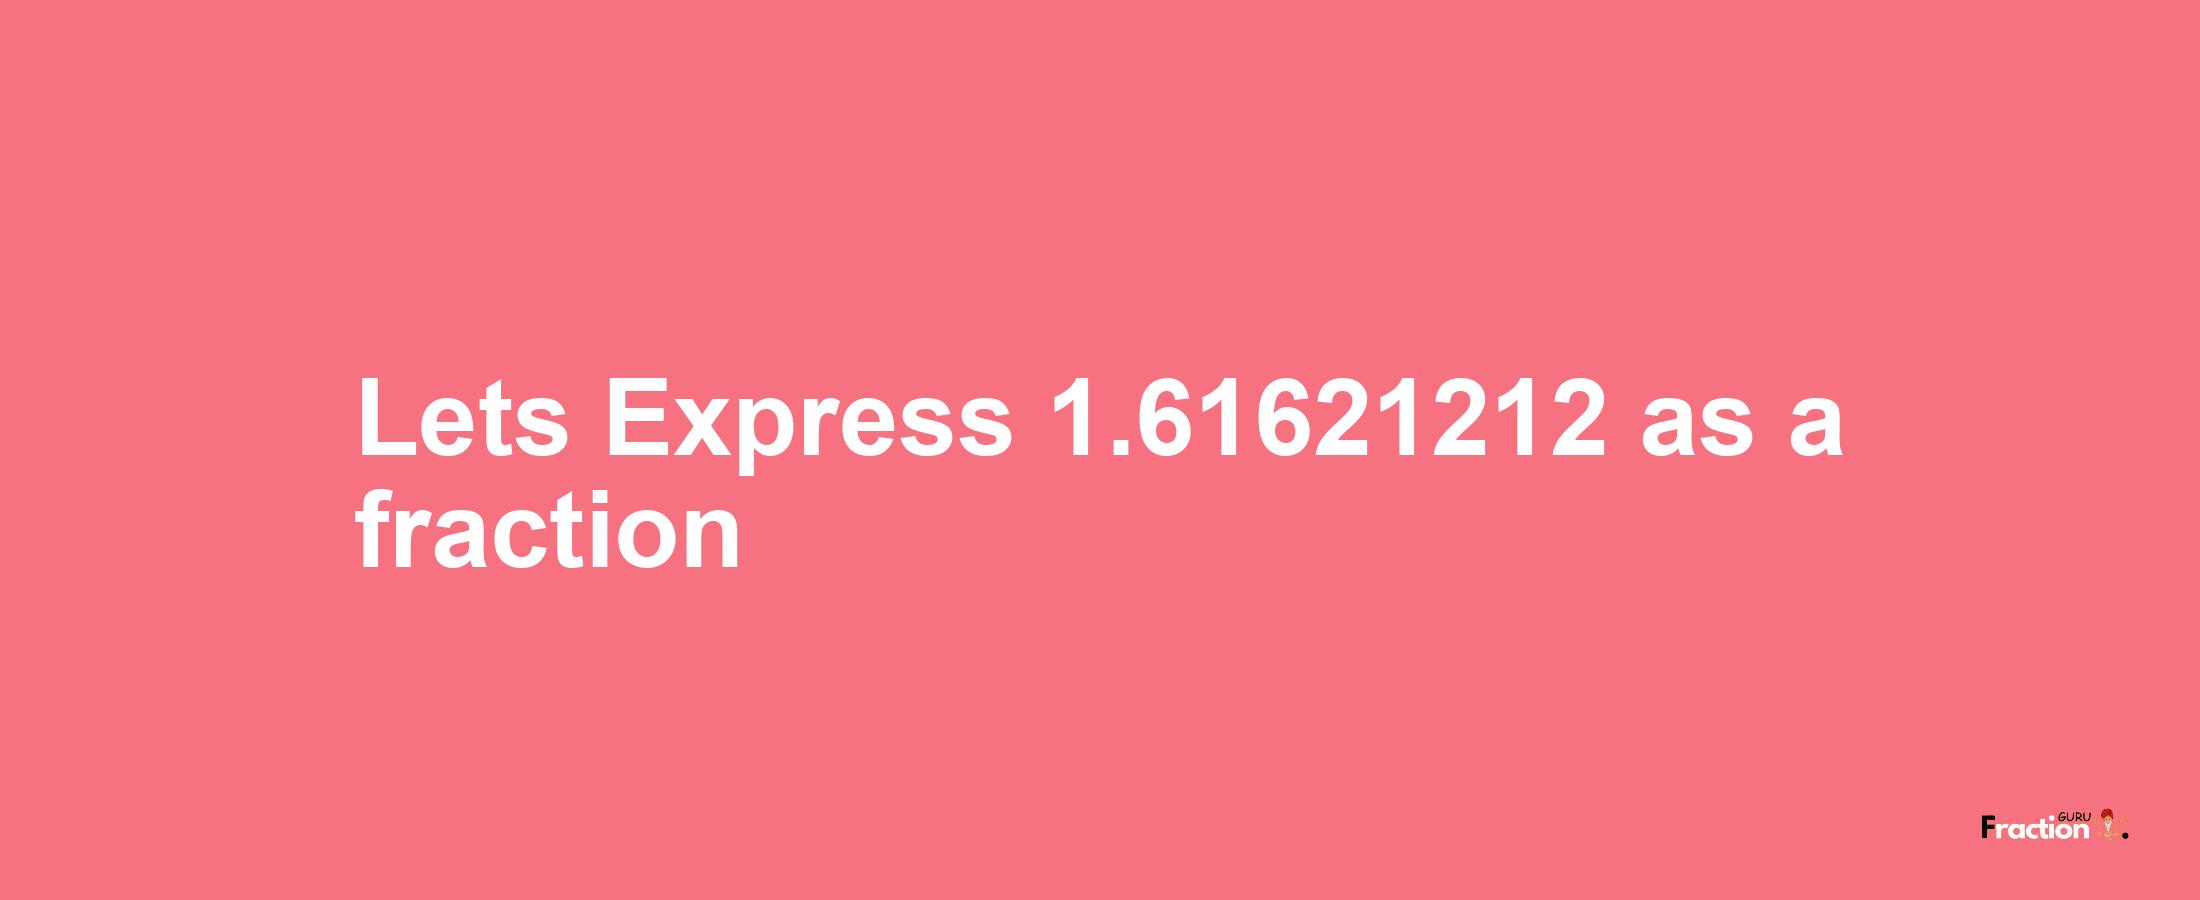 Lets Express 1.61621212 as afraction